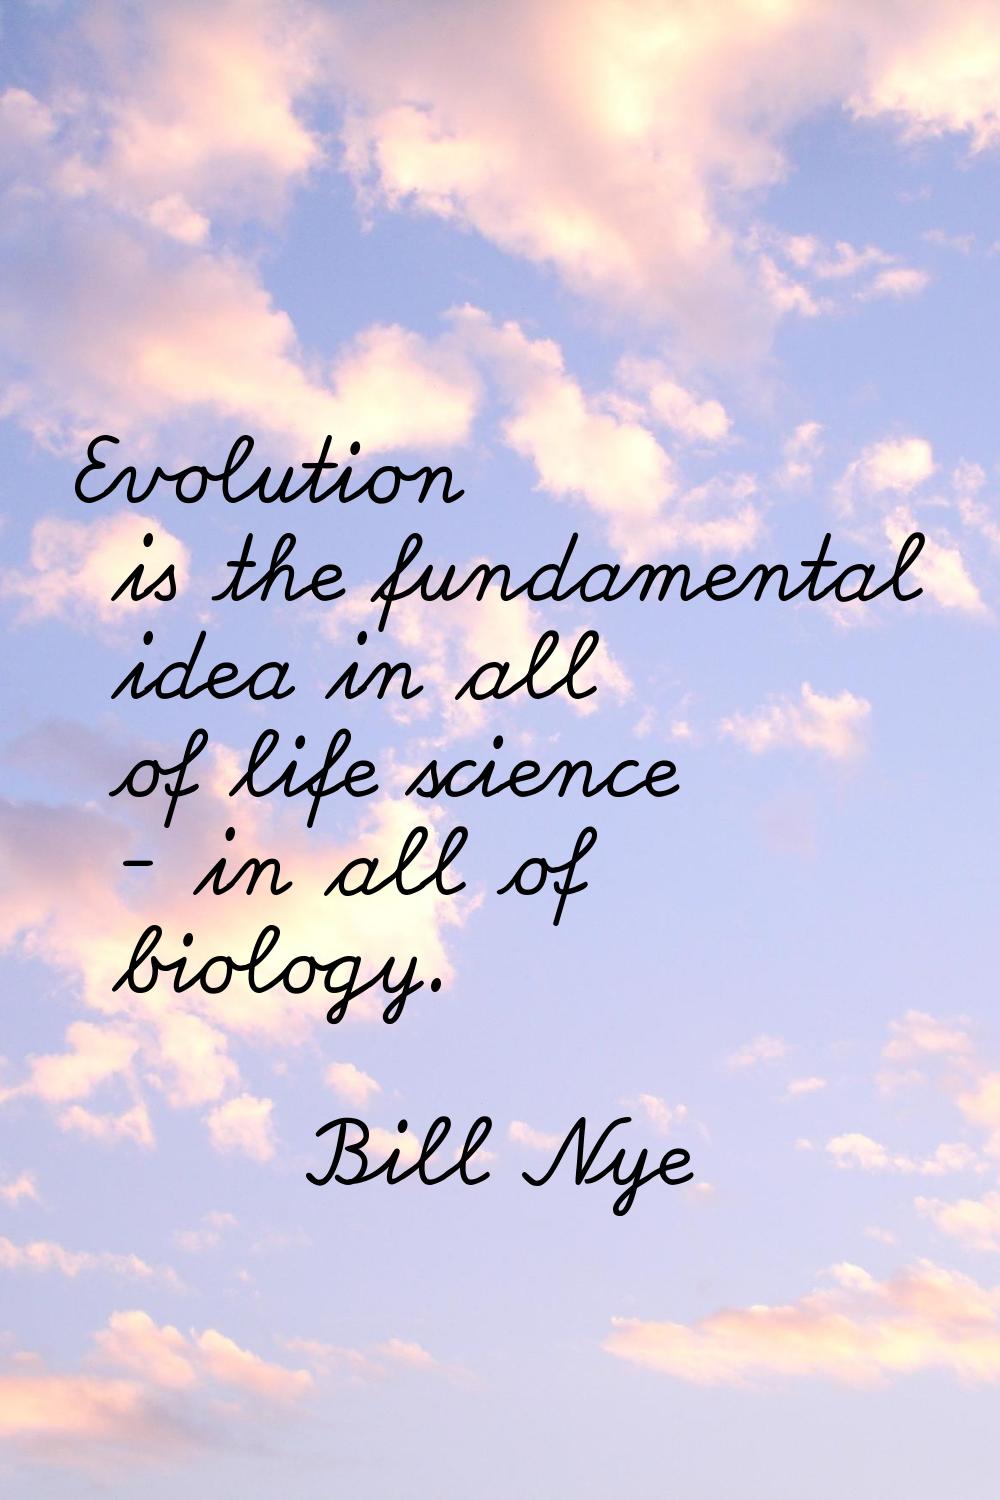 Evolution is the fundamental idea in all of life science - in all of biology.